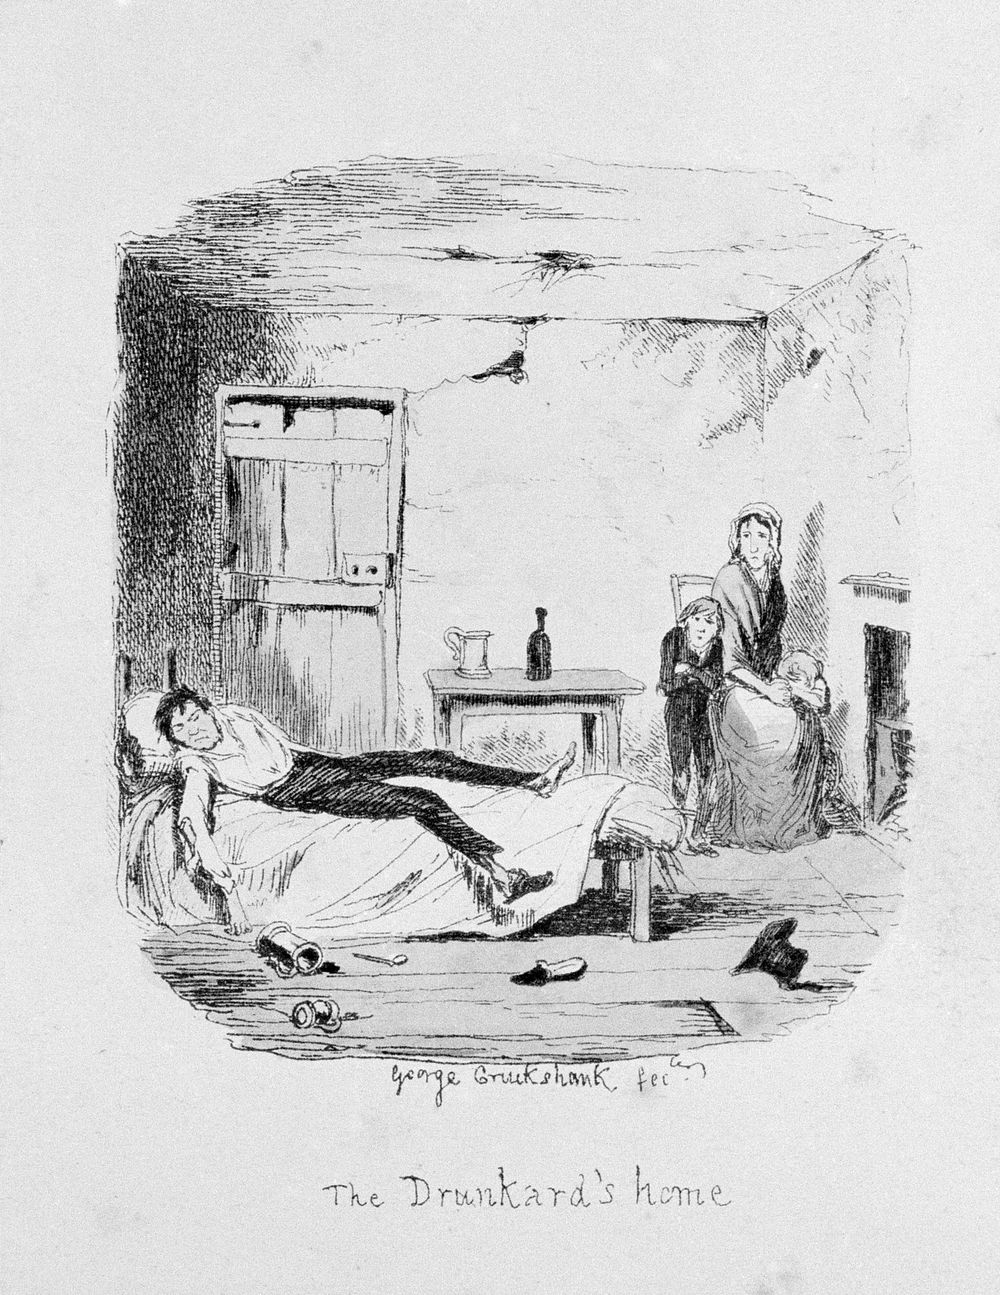 A hopeless drunkard lying on his bed watched by his poor wife and son. Coloured etching by G. Cruikshank, c. 1842, after…